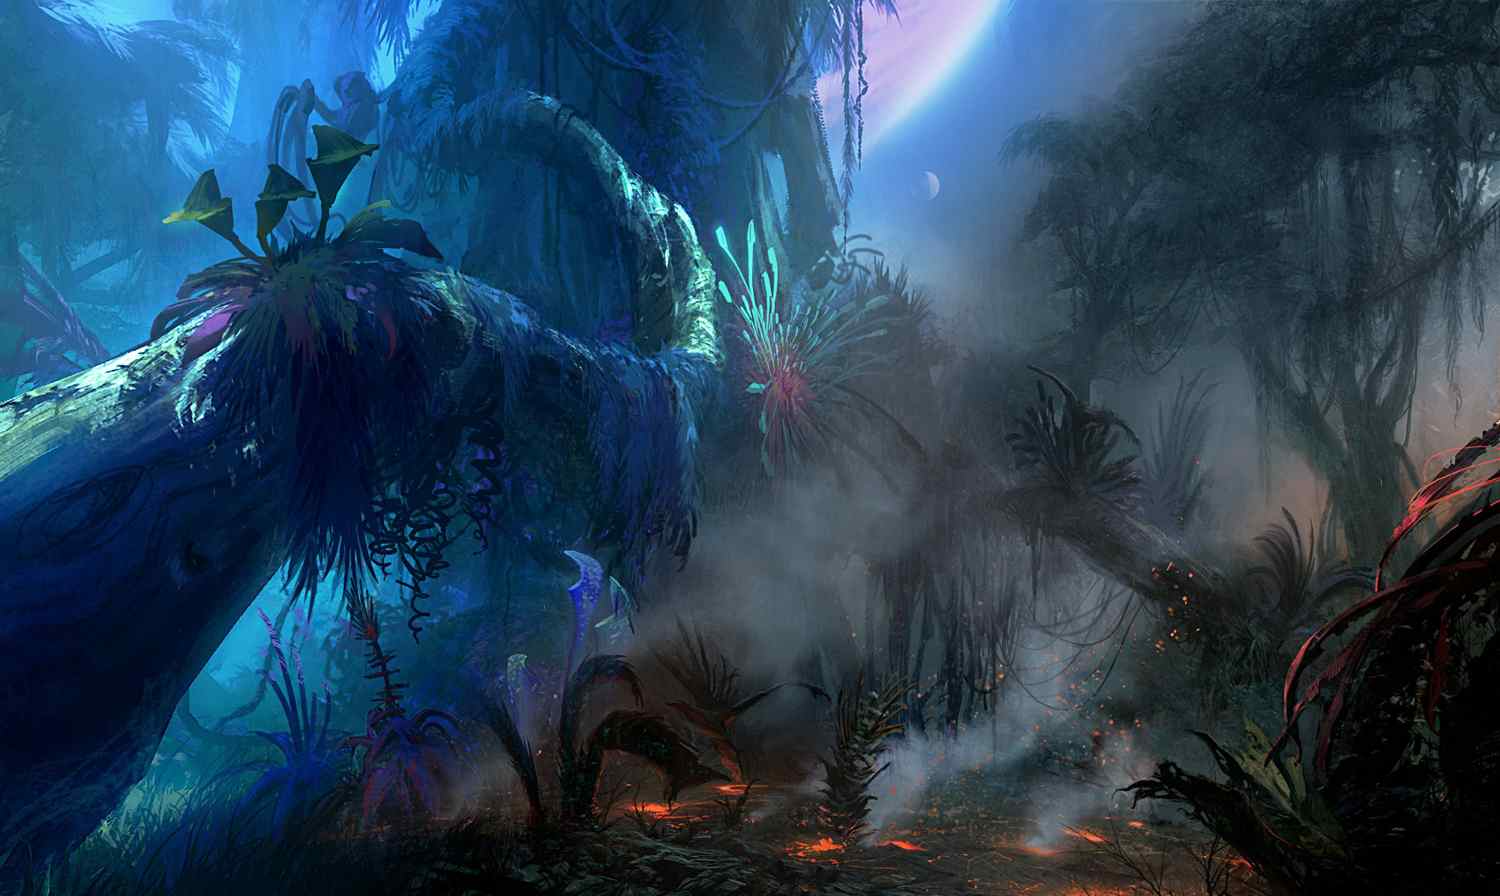 Movie Backgrounds Avatar Wallpapers